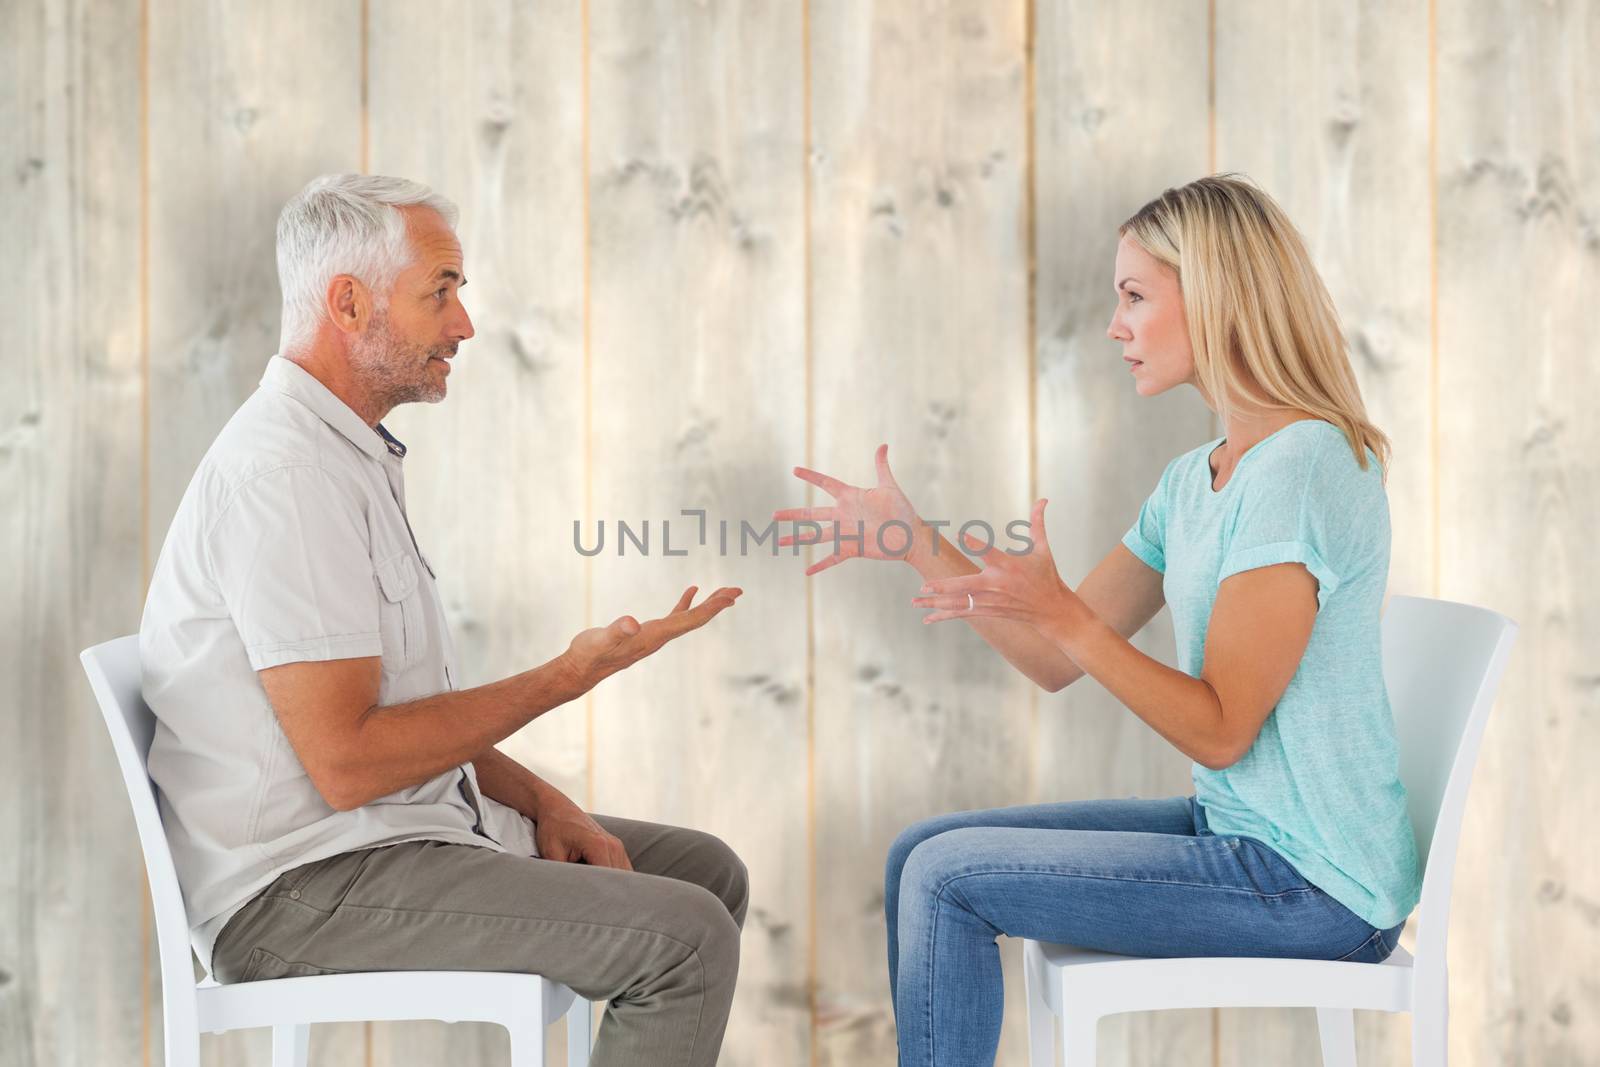 Composite image of unhappy couple sitting on chairs having an argument by Wavebreakmedia